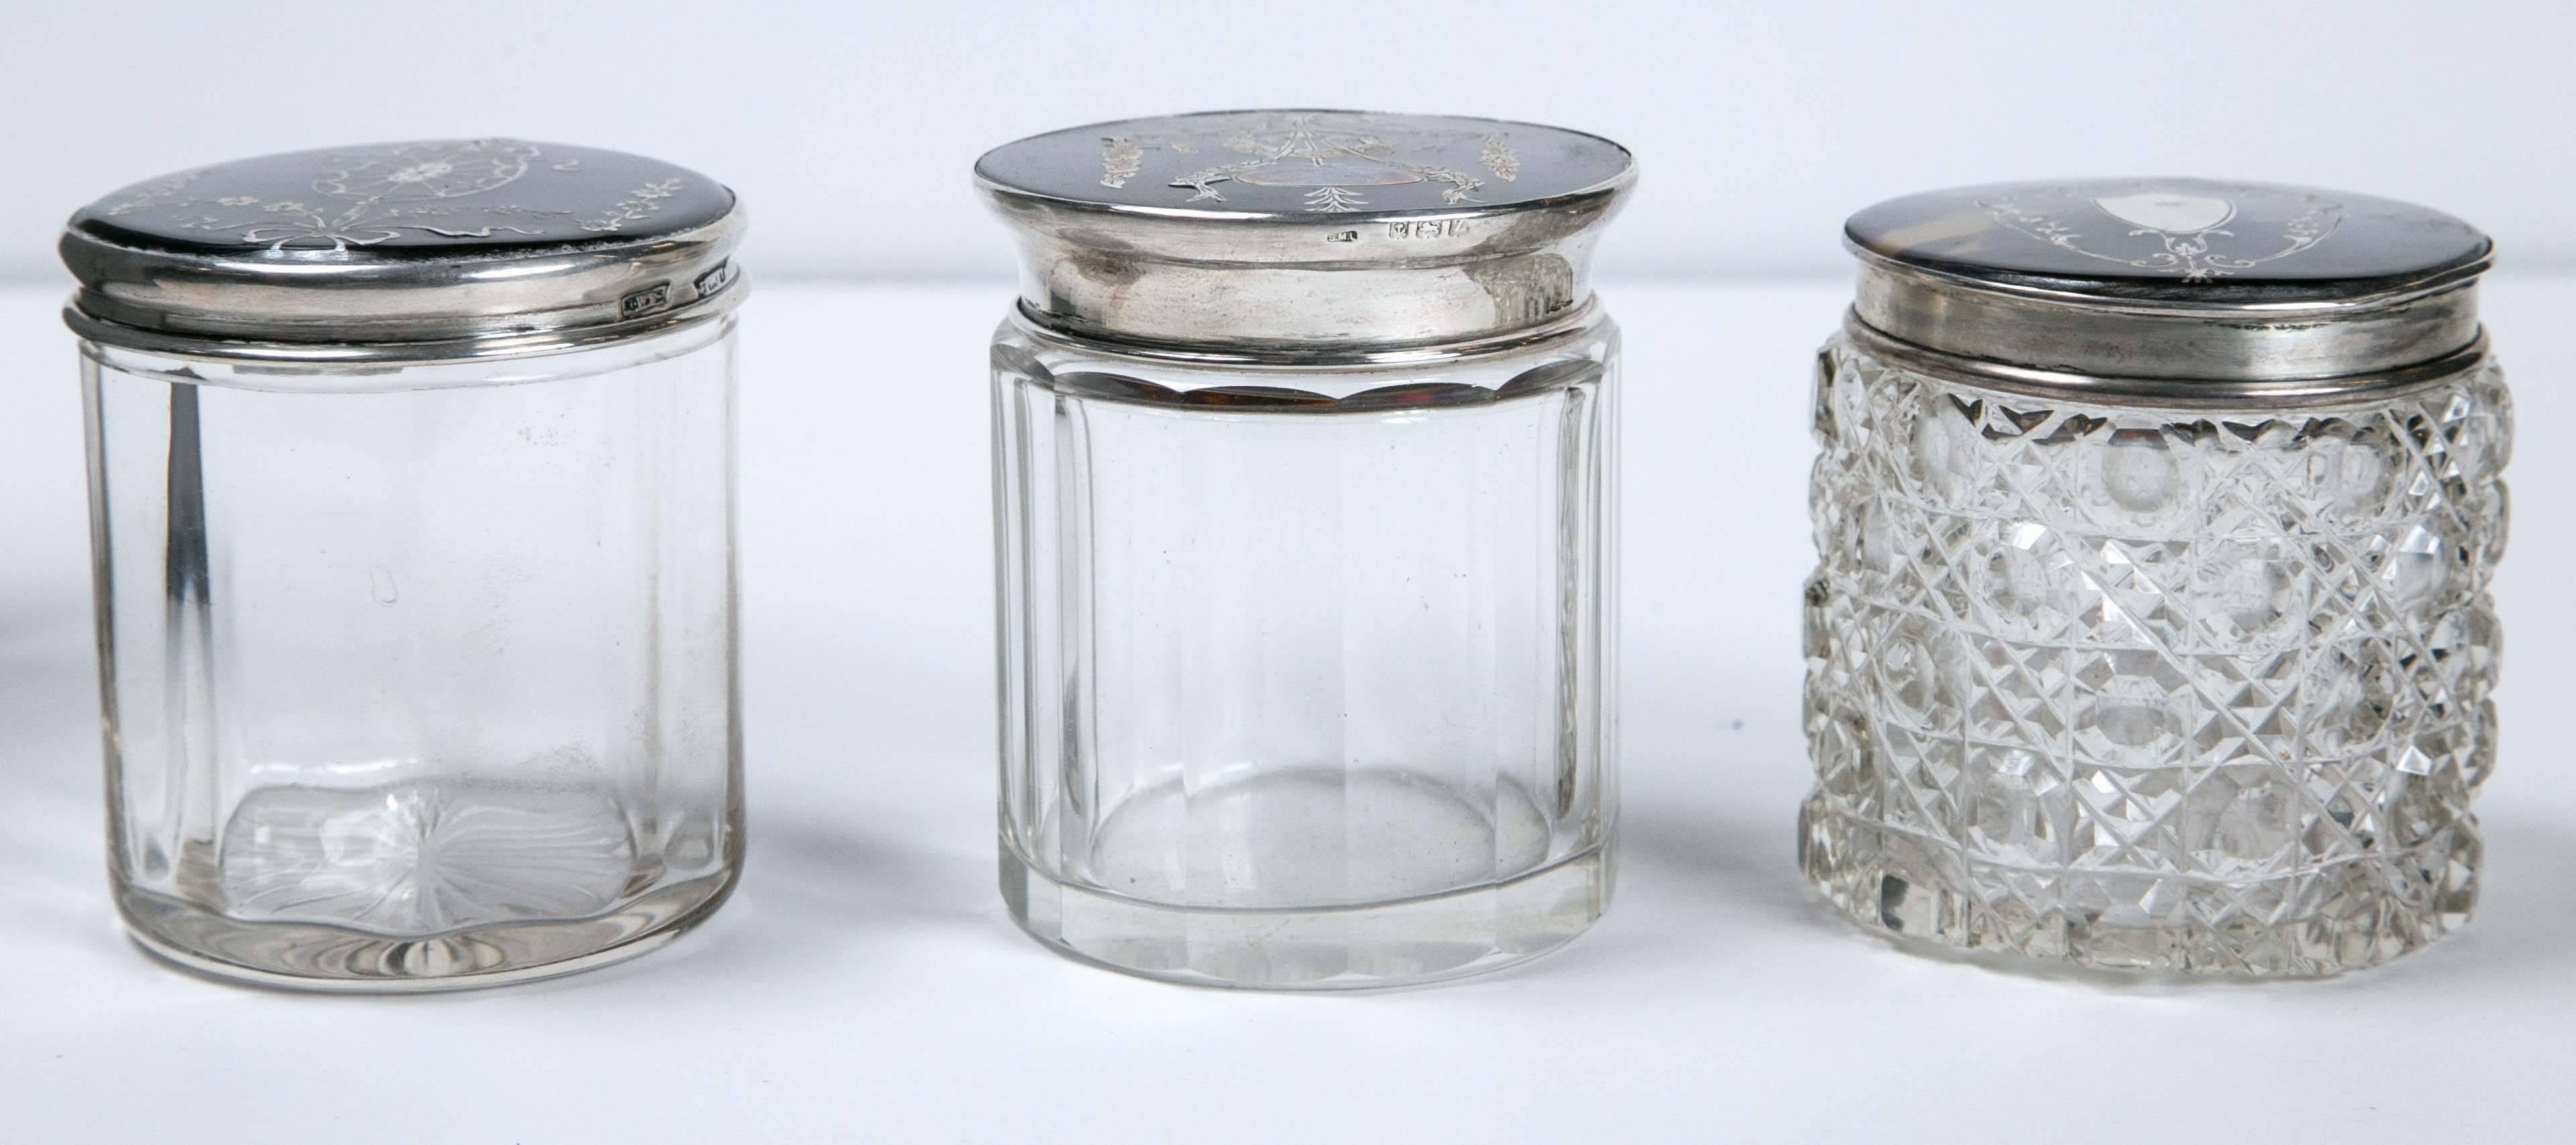 Early 20th century lot of antique dresser jars with tortoise lids and sterling. (1) Dresser jar with shell top and sterling silver inlay, glass jar. (2) Dresser jar with tortoise pique top and sterling silver rim, glass jar. (3) Dresser jar with